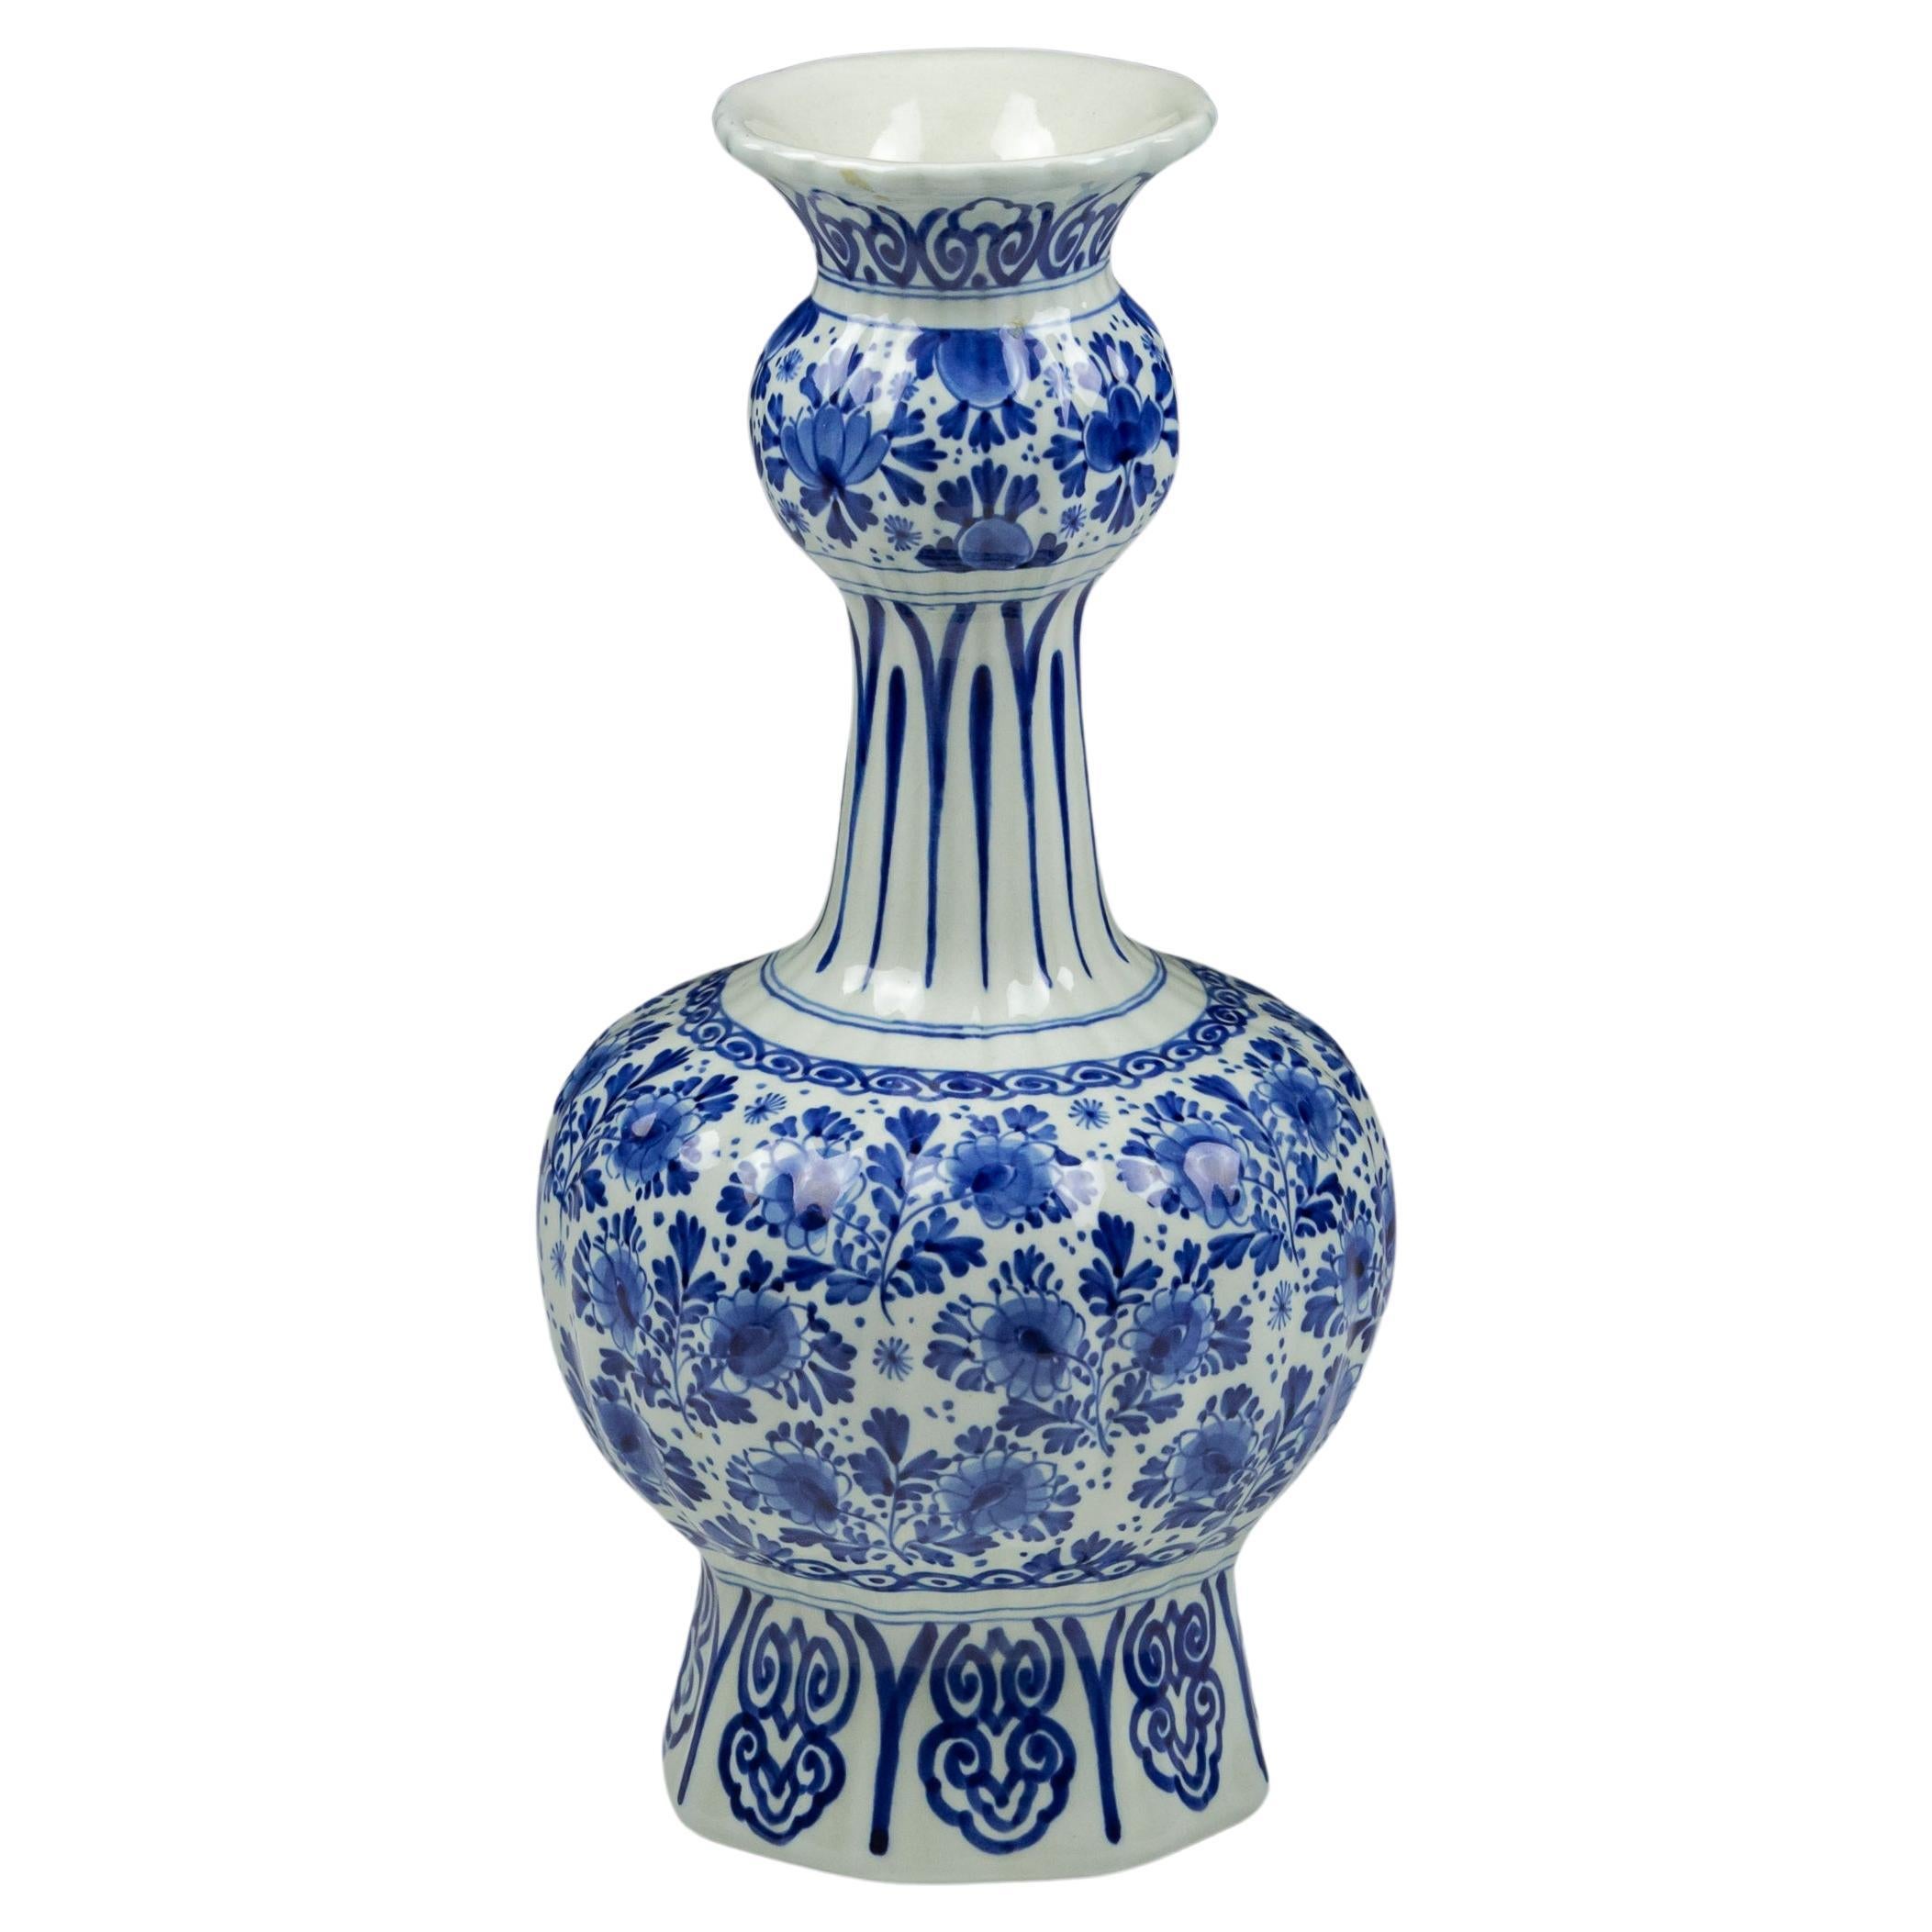 20th Century Blue and White Delft Knobbelvaas or Gourd Vase For Sale